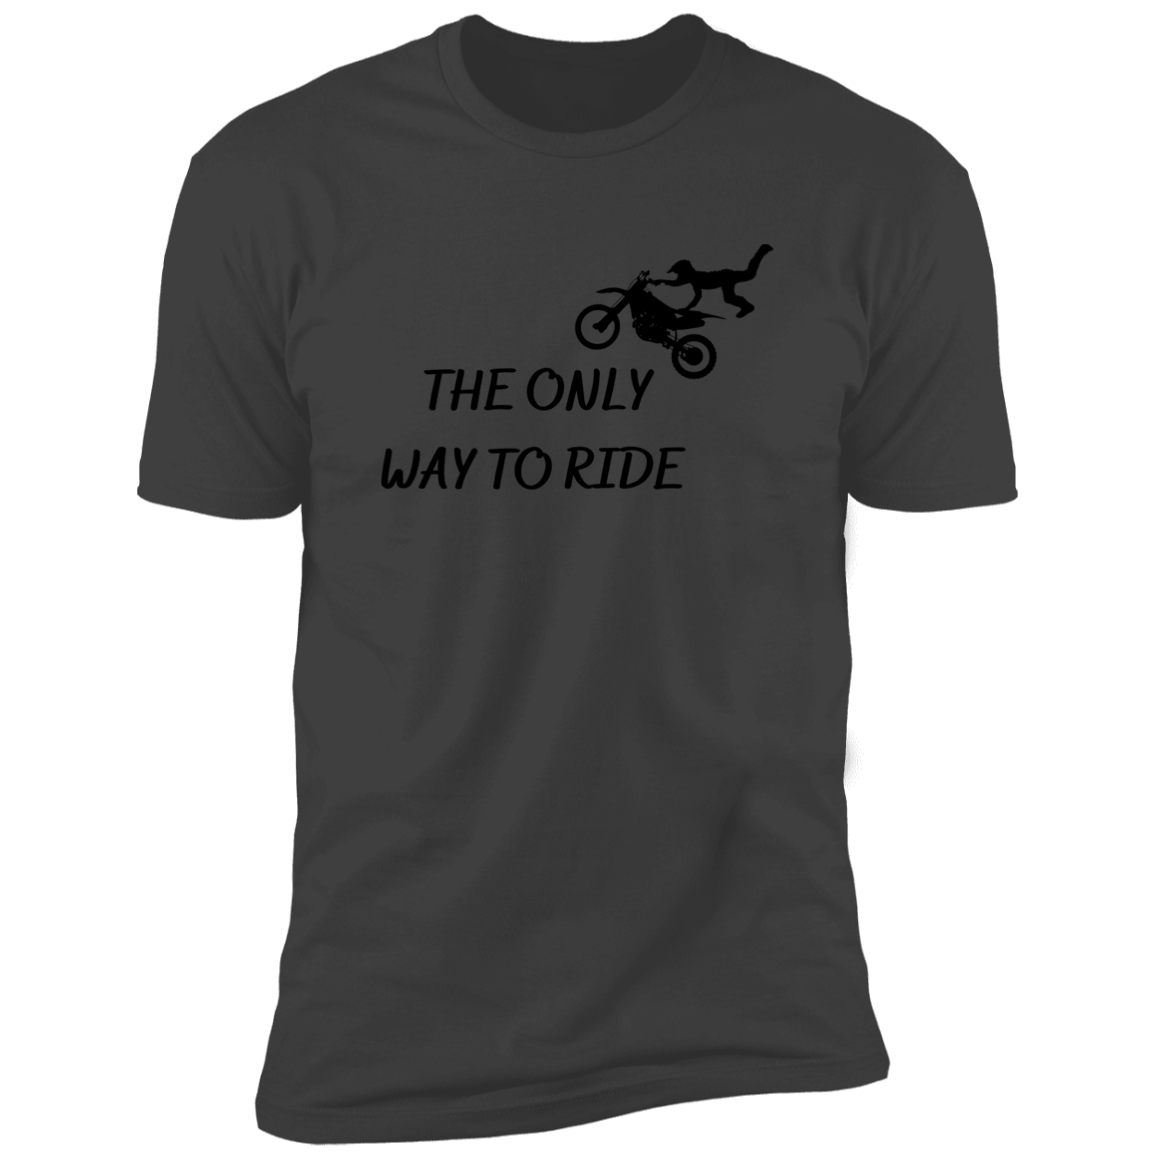 The Only Way To Ride / Extreme Softness /Premium Short Sleeve Tee